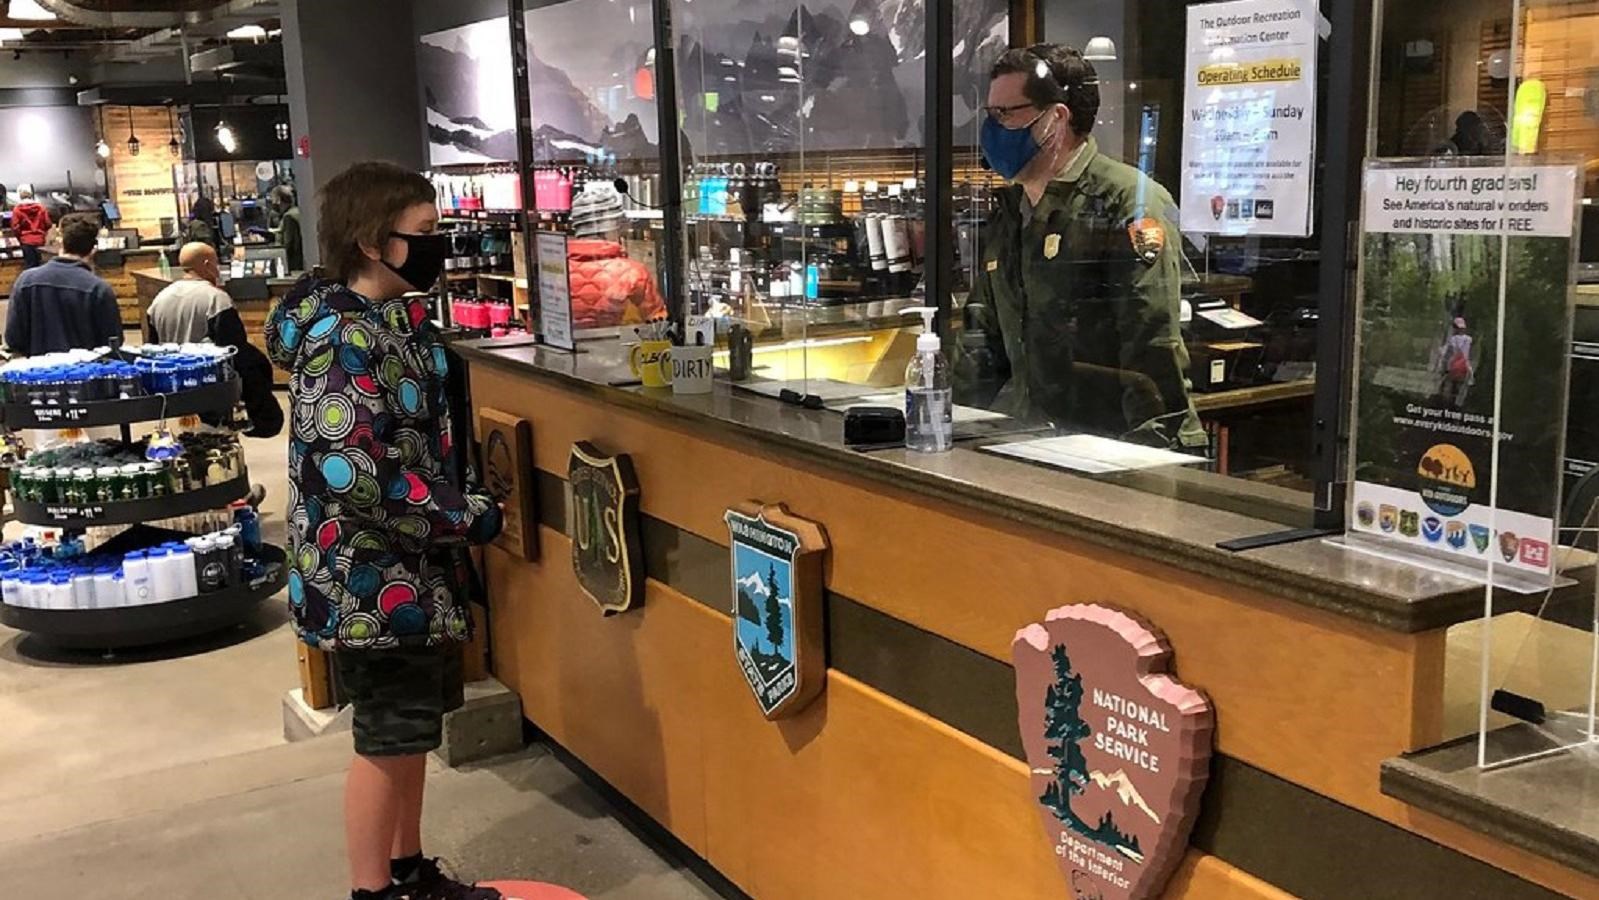 Person in ranger uniform talking with visitor